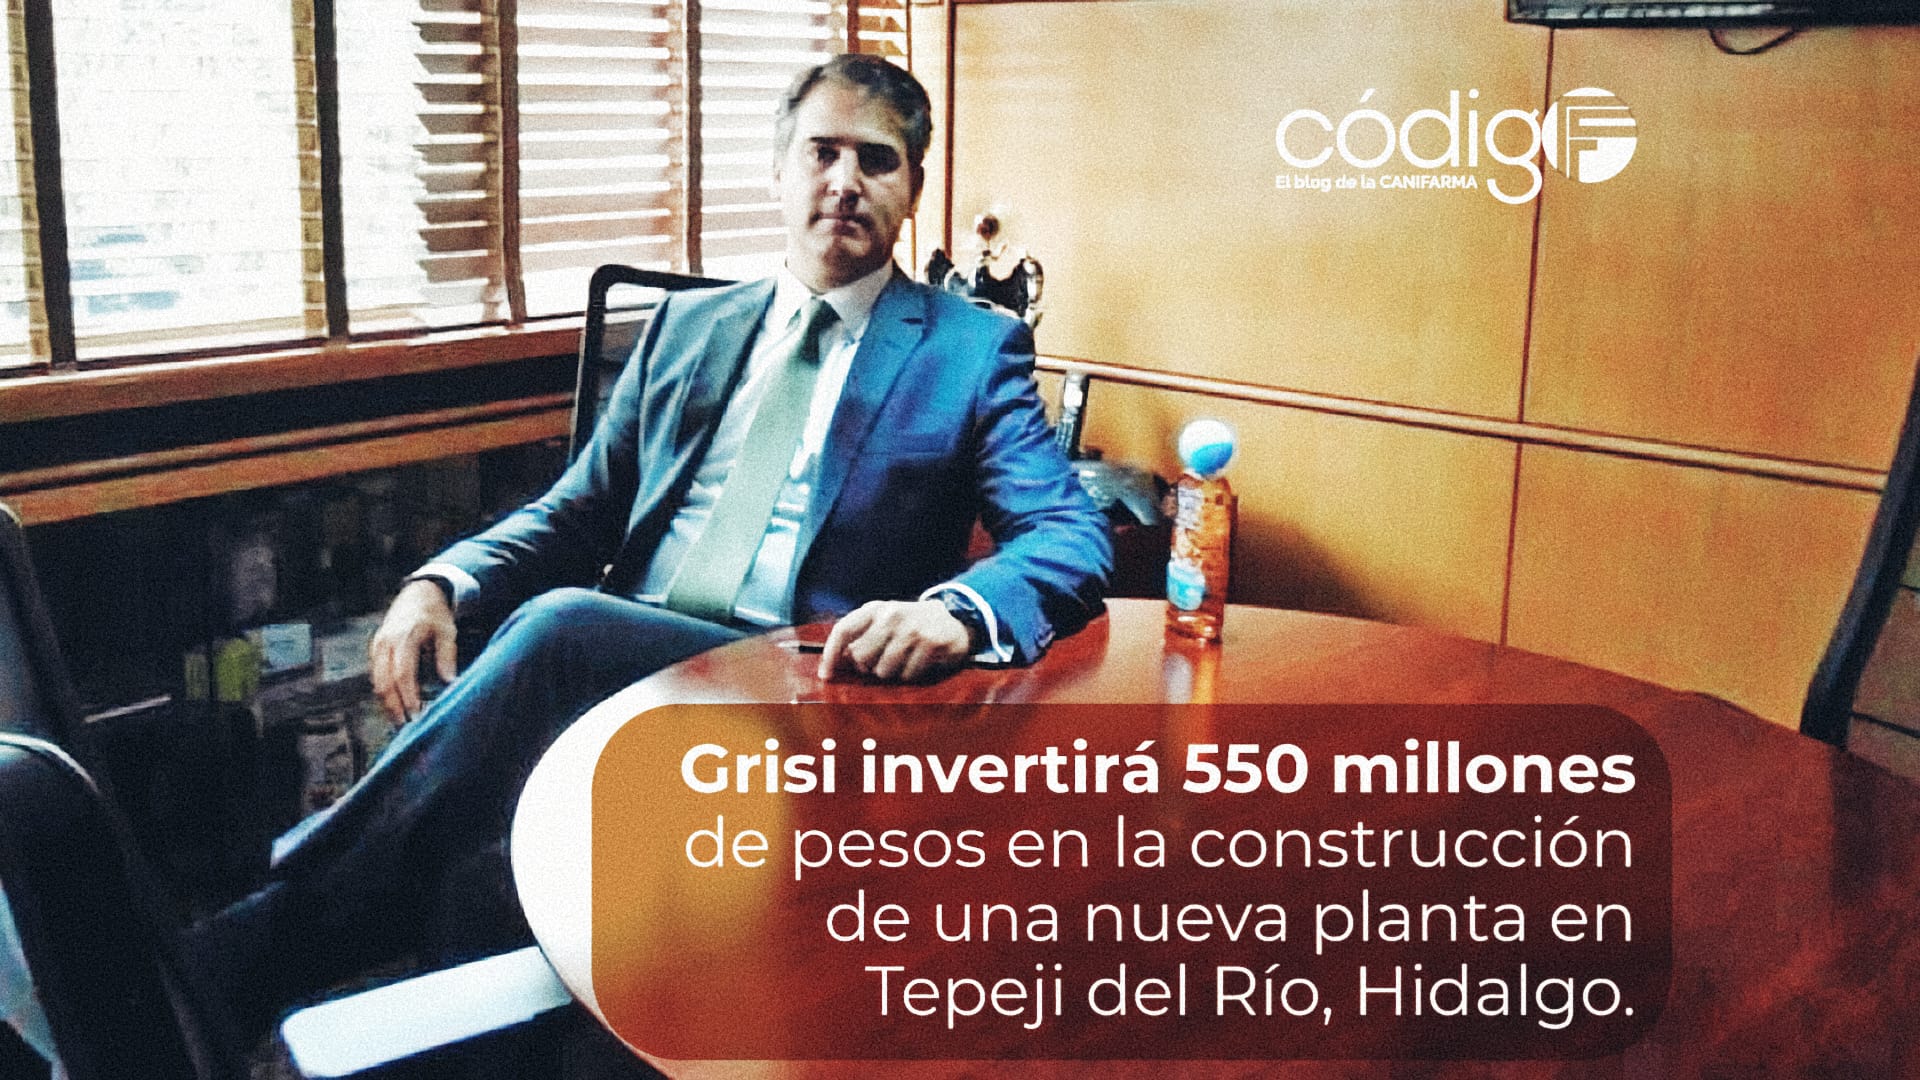 Grisi will invest 550 million pesos in the construction of a new plant in Tepeji del Río, Hidalgo